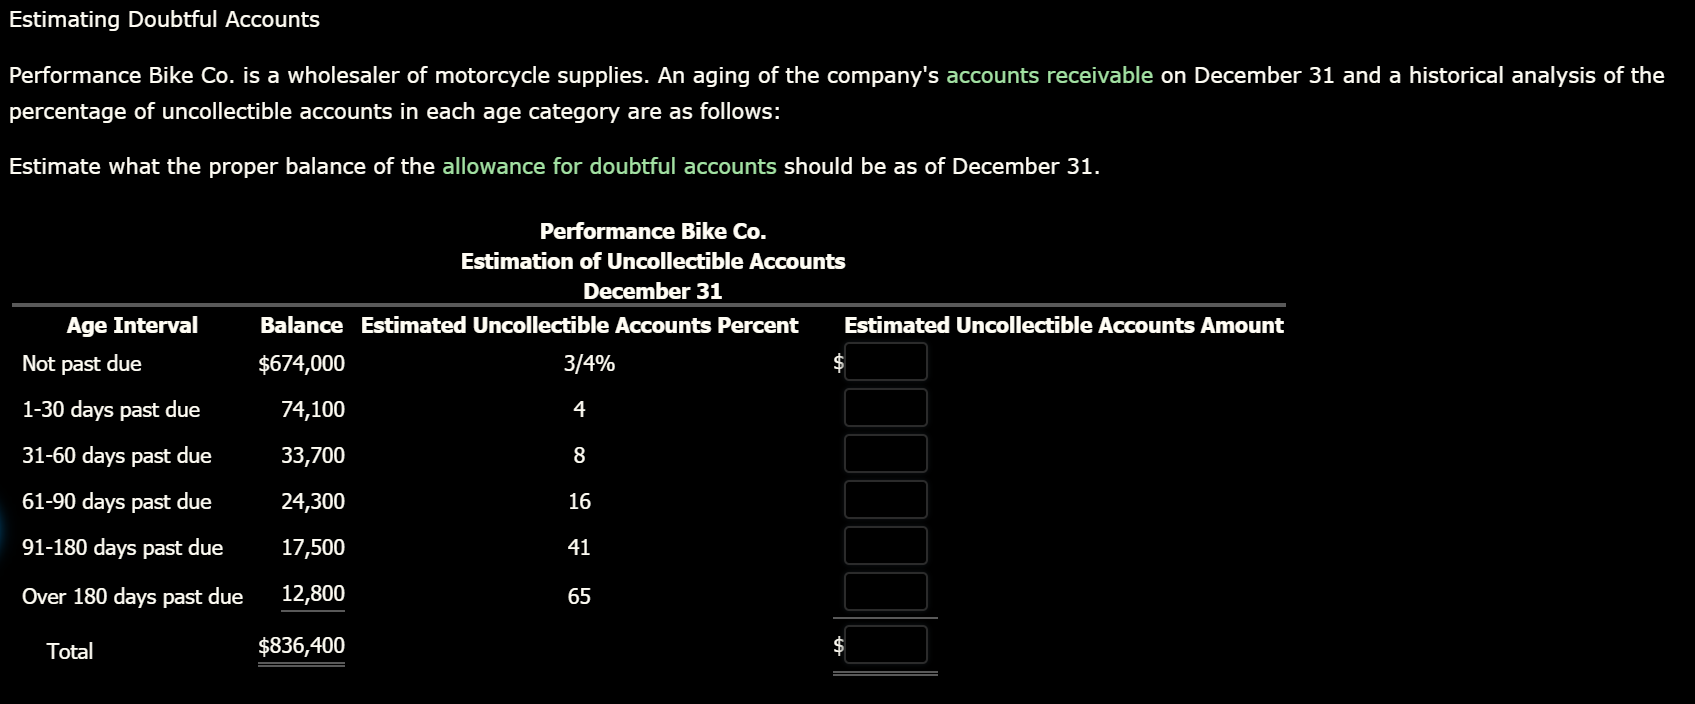 Estimating Doubtful Accounts
Performance Bike Co. is a wholesaler of motorcycle supplies. An aging of the company's accounts receivable on December 31 and a historical analysis of the
percentage of uncollectible accounts in each age category are as follows:
Estimate what the proper balance of the allowance for doubtful accounts should be as of December 31.
Performance Bike Co.
Estimation of Uncollectible Accounts
December 31
Balance Estimated Uncollectible Accounts Percent
Estimated Uncollectible Accounts Amount
Age Interval
Not past due
3/4%
$674,000
1-30 days past due
74,100
4
31-60 days past due
33,700
8
61-90 days past due
24,300
16
91-180 days past due
17,500
41
12,800
Over 180 days past due
65
$836,400
Total
